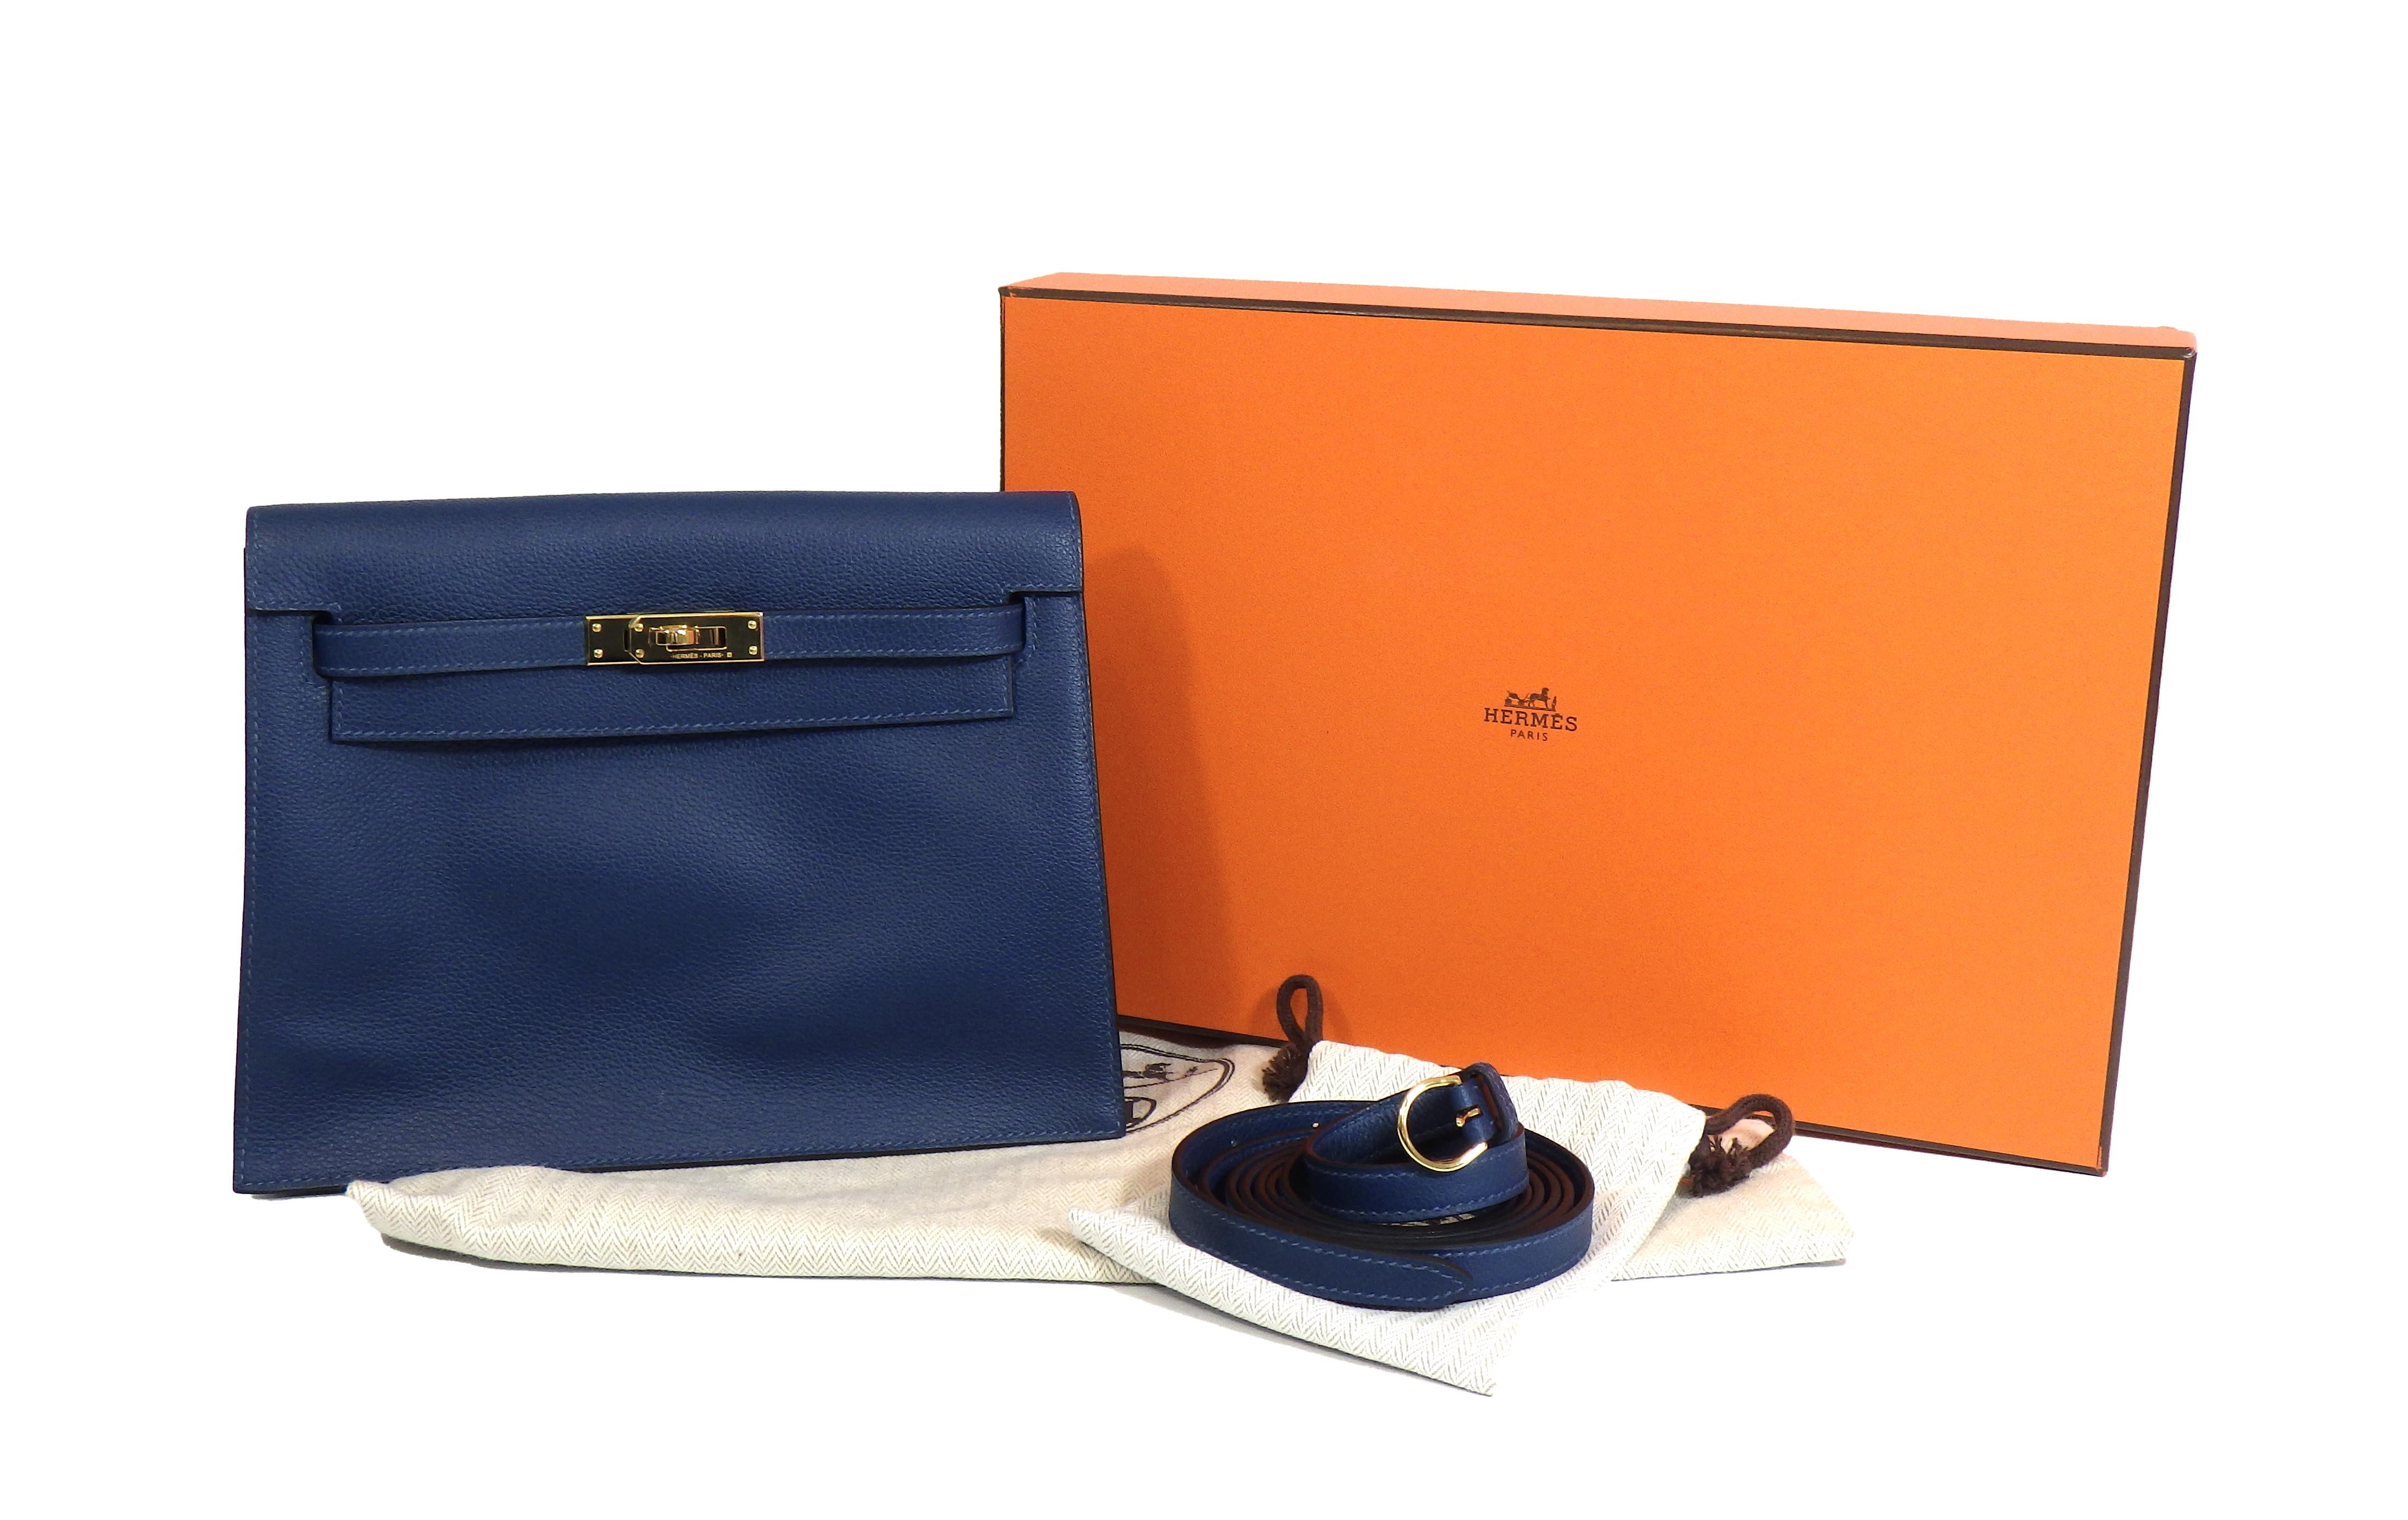 Hermes - Excellent - Kelly Danse II 2019 - Deep Blue - Belt Bag

Description

Designed by Jean-Paul Gaultier and originally released in 2008, Kelly Danse is a more casual version of the iconic Hermès Kelly. Originally crafted from luxuriously soft